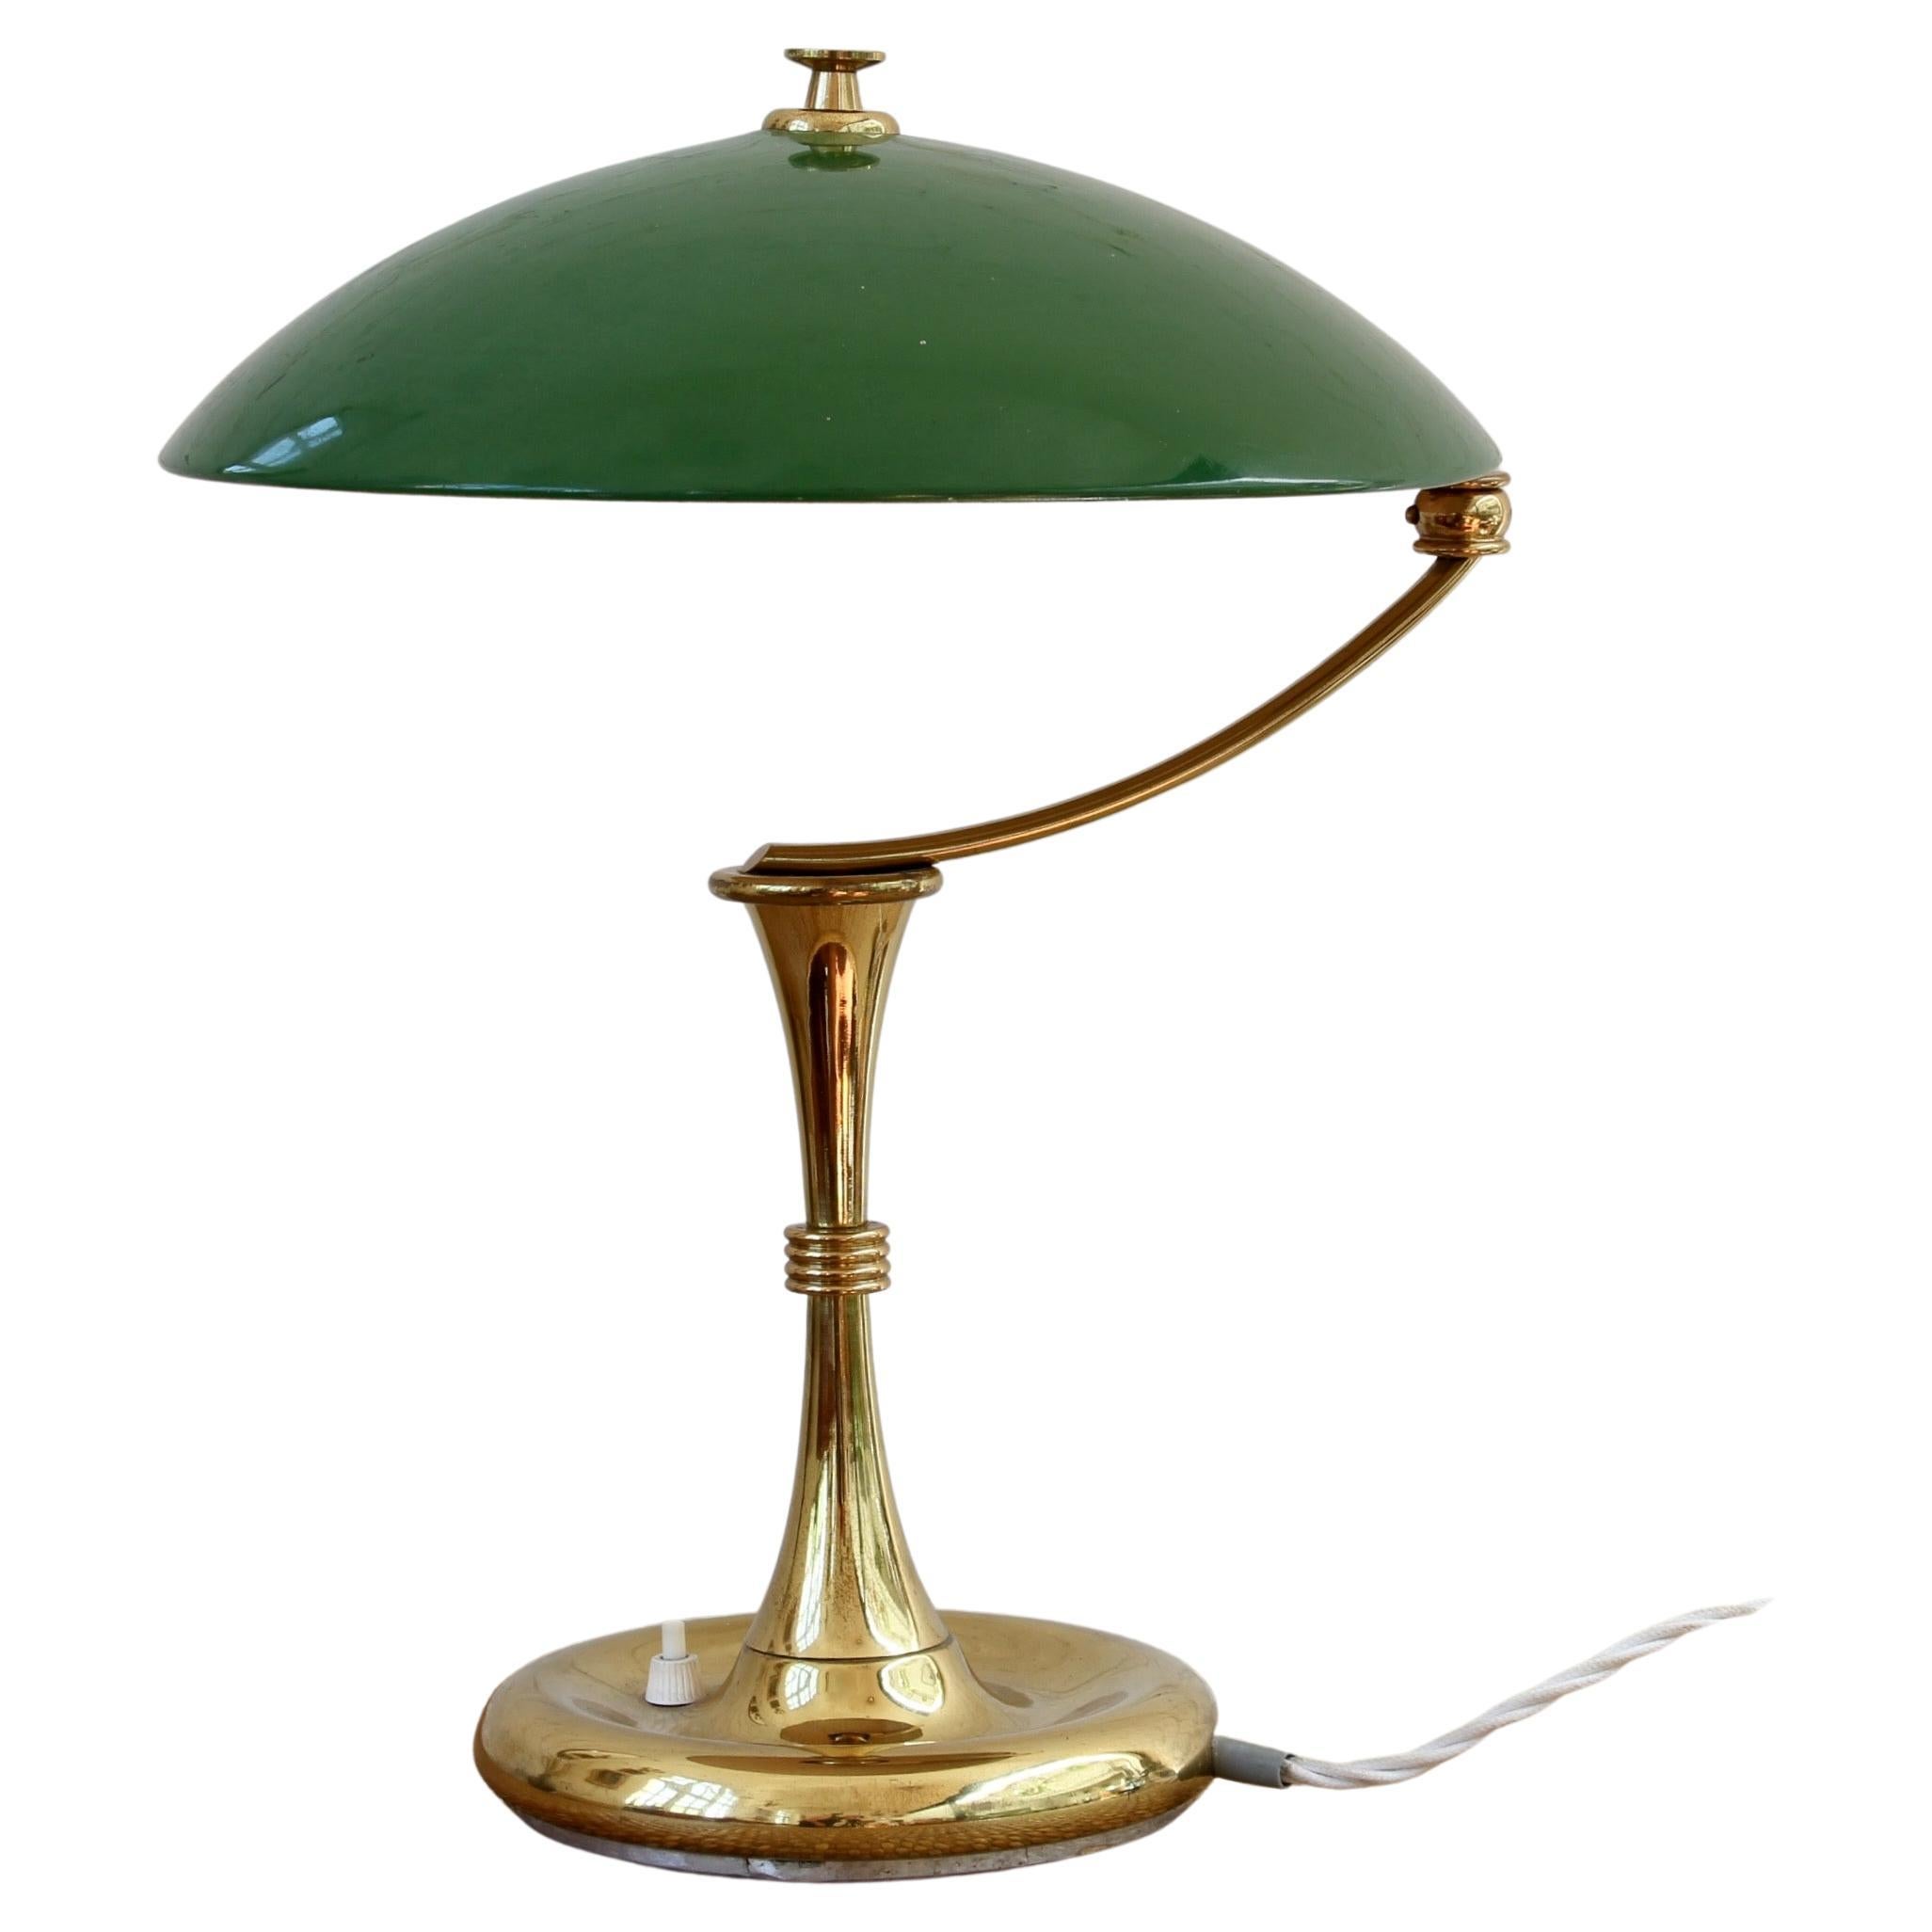 Italian Mid-Century Brass-Covered Desk Lamp with Green Shade 'circa 1950s' For Sale